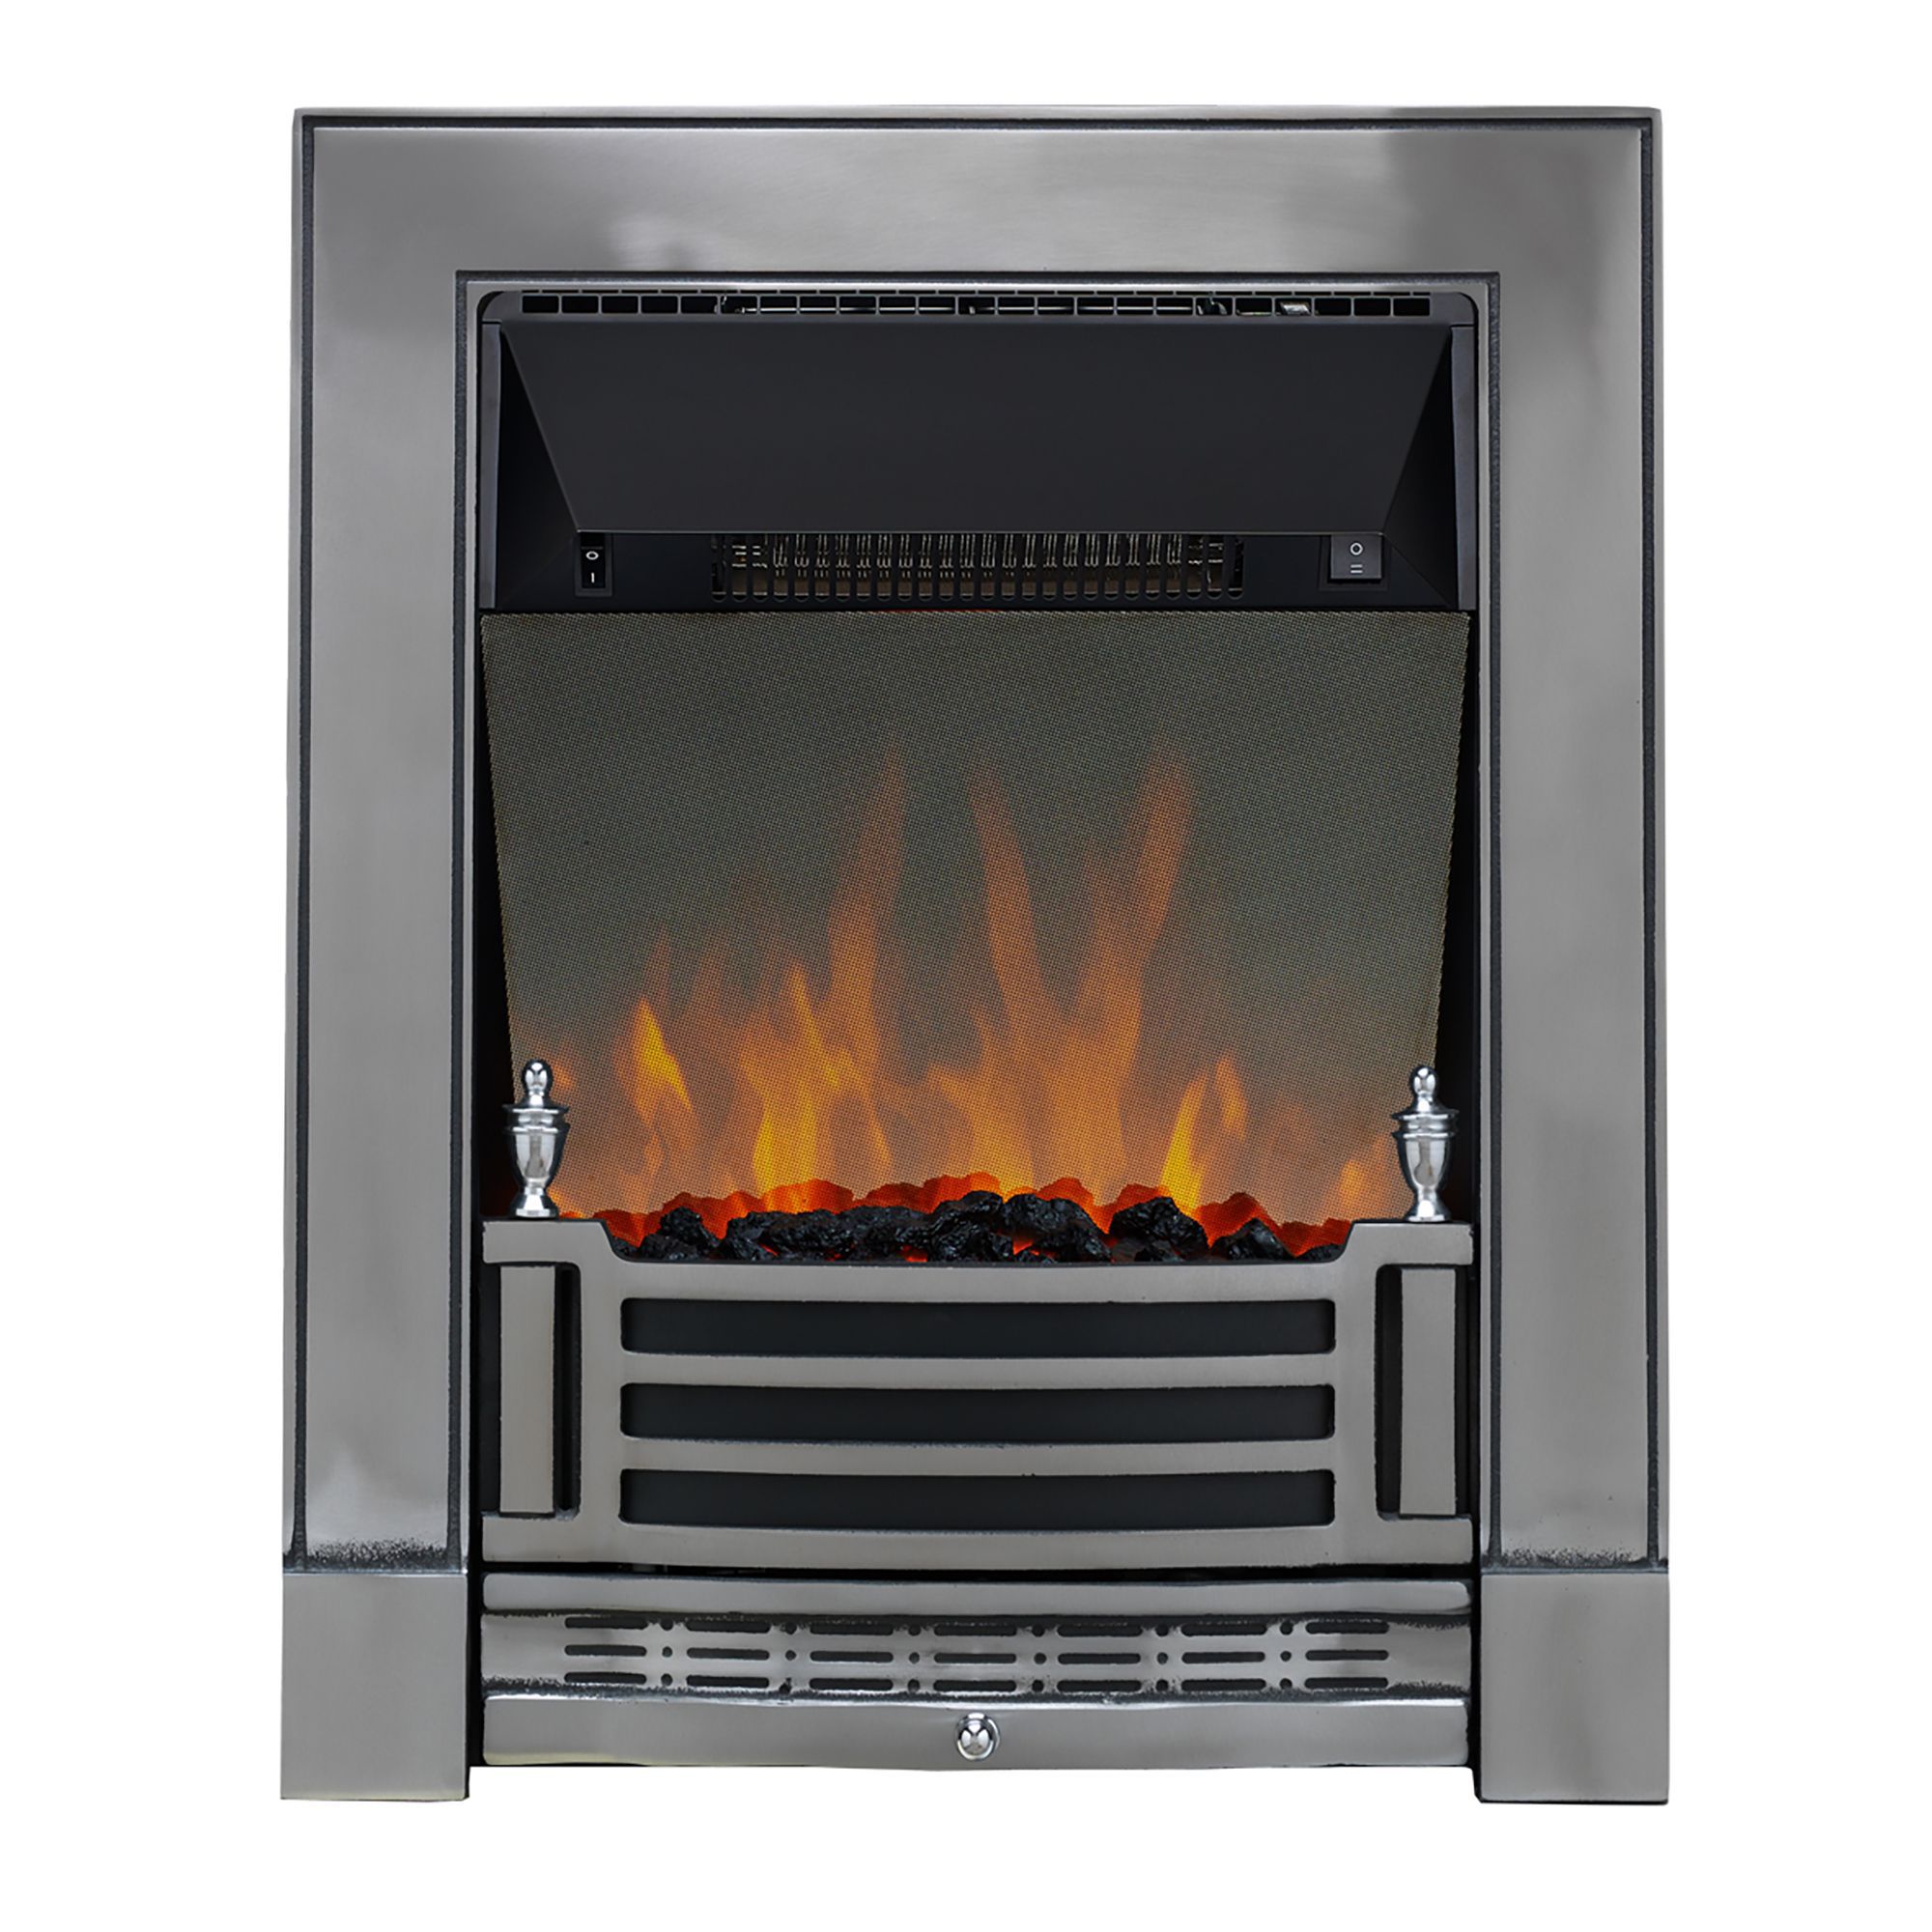 Focal Point Finsbury 2kW Chrome effect Electric Fire